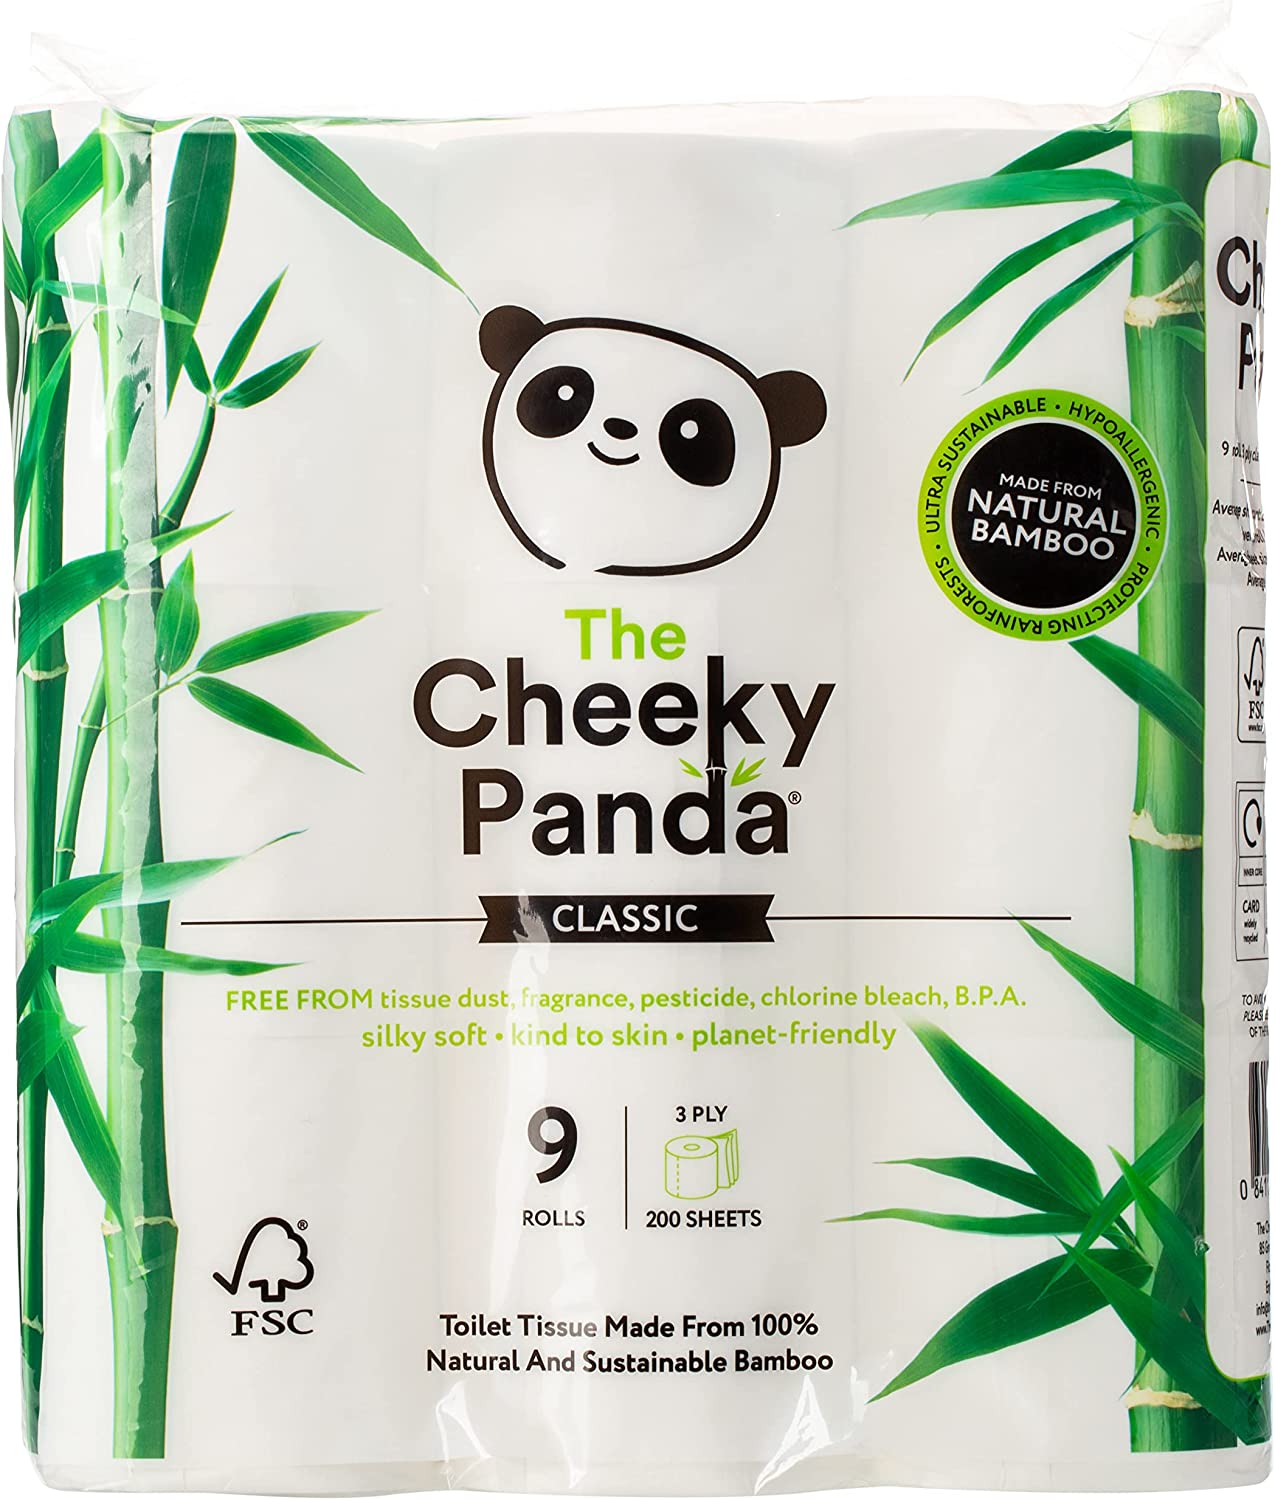 The Cheeky Panda Bamboo Toilet Roll Tissue Paper 9 Rolls 3ply RRP 9.60 CLEARANCE XL 8.99